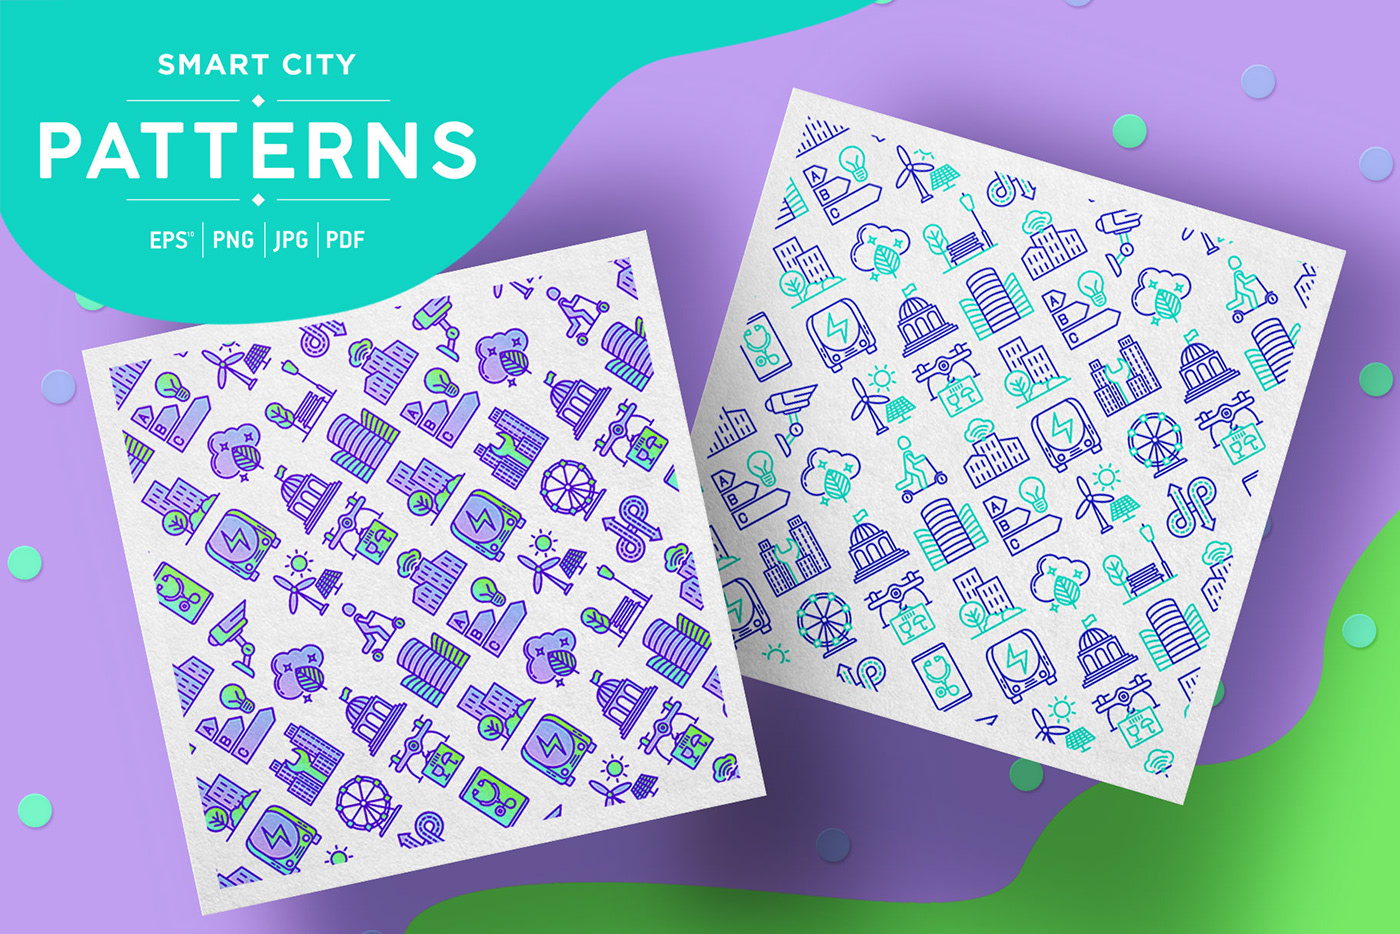 seamless pattern city Smart Icon vector Technology infrastructure concept building